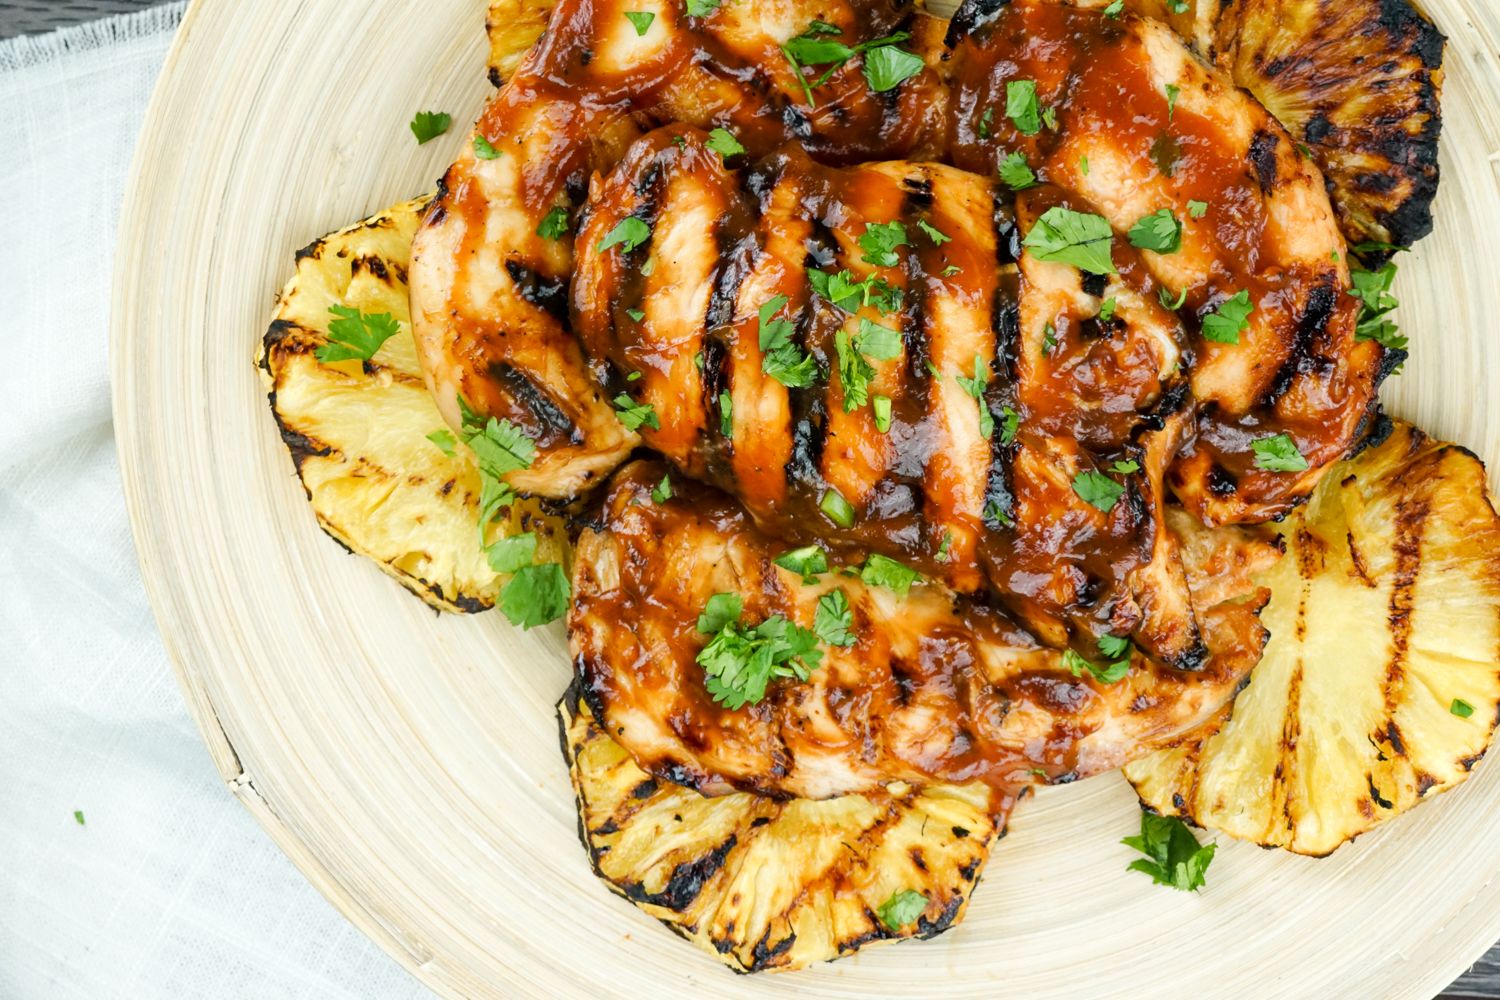 Grilled Pineapple Barbecue Chicken